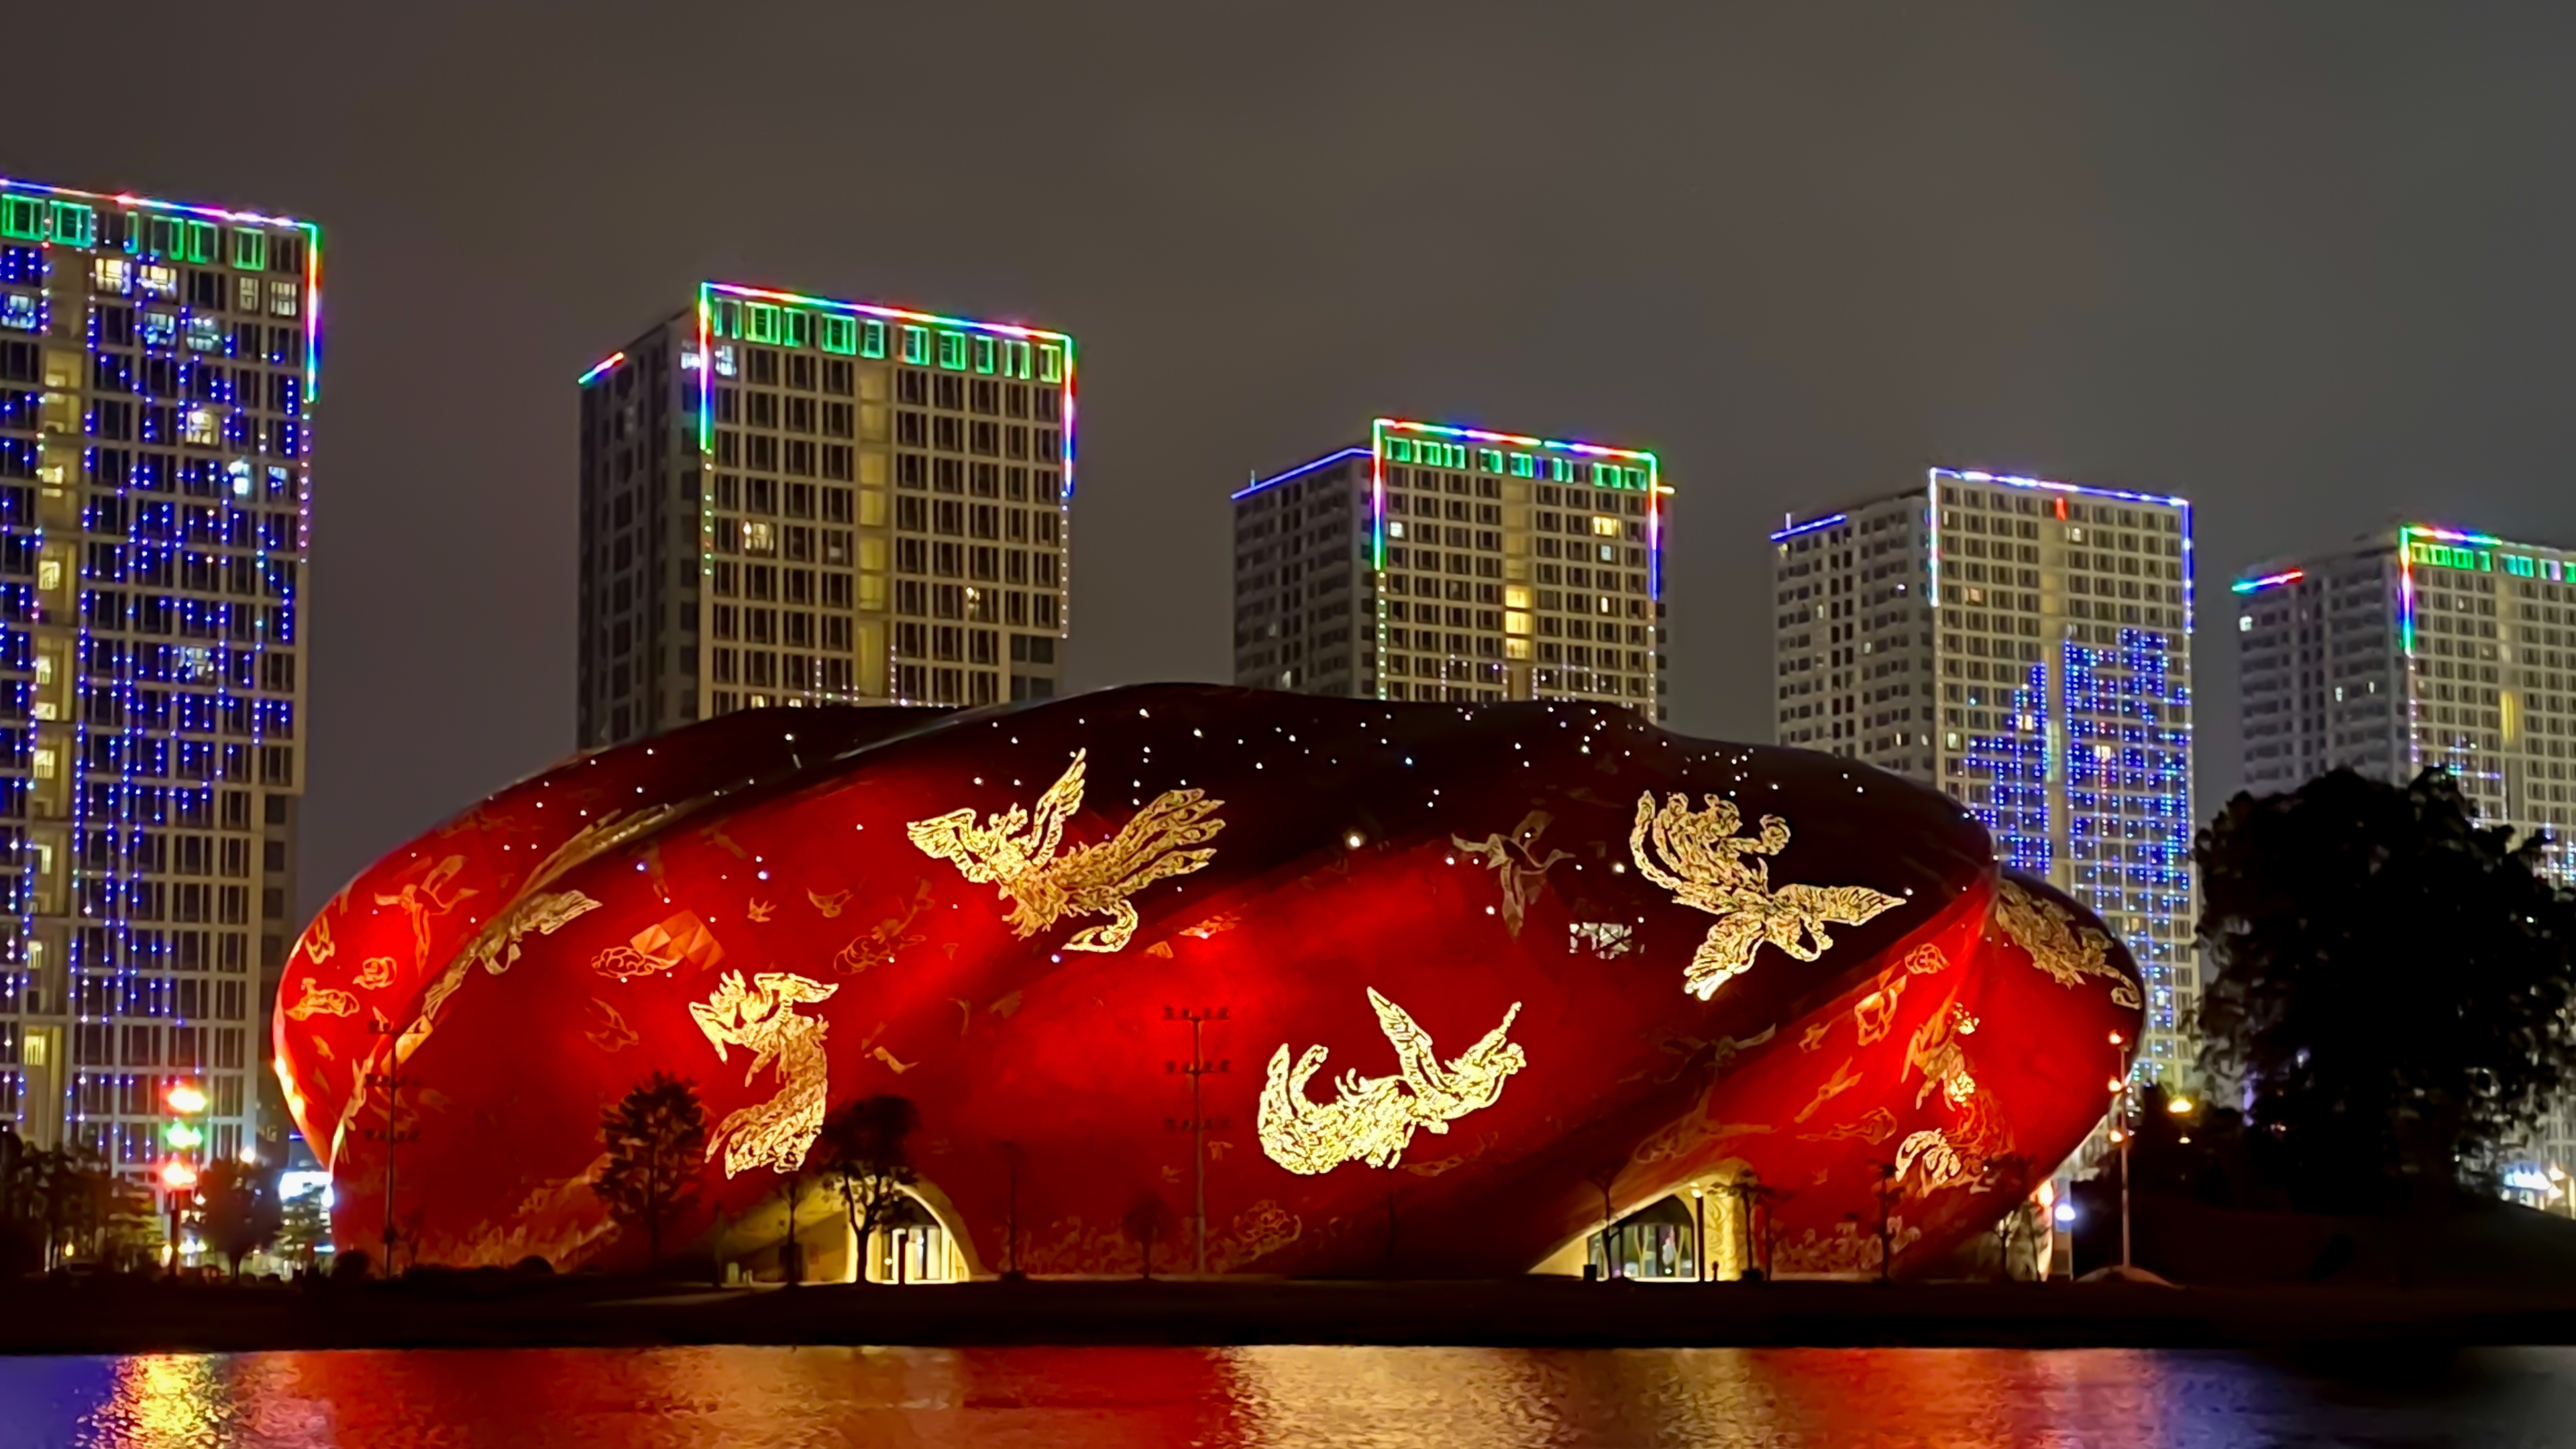 Guangzhou Grand Theatre at night light up in red and gold in front of high rise buildings